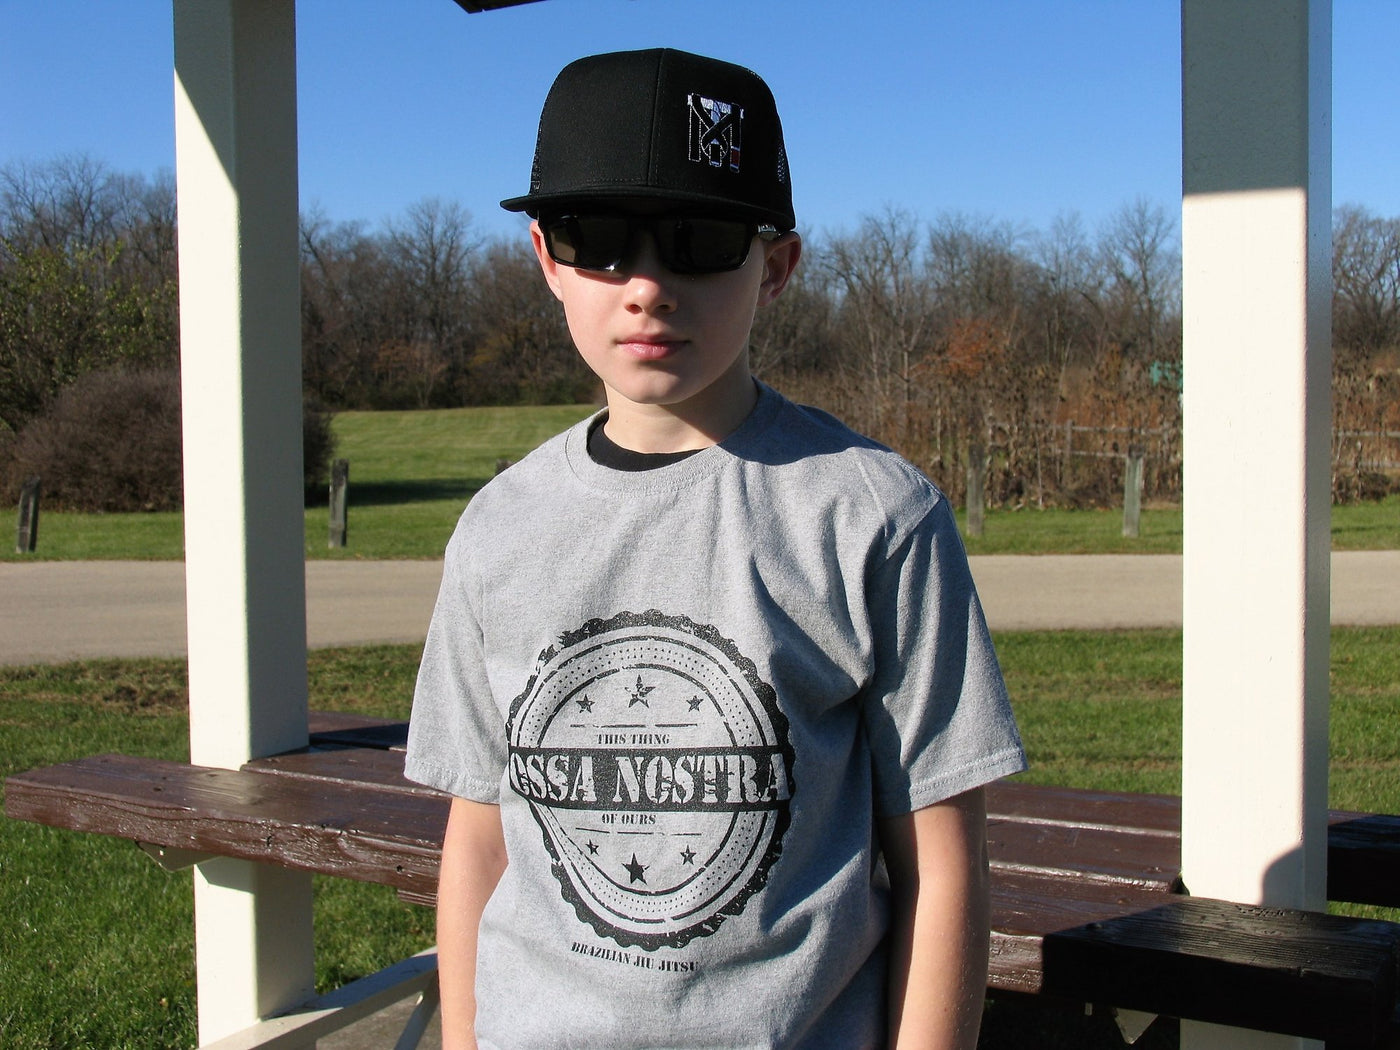 OSSA NOSTRA (This thing of ours) Top Mount Kids Who Roll Tee